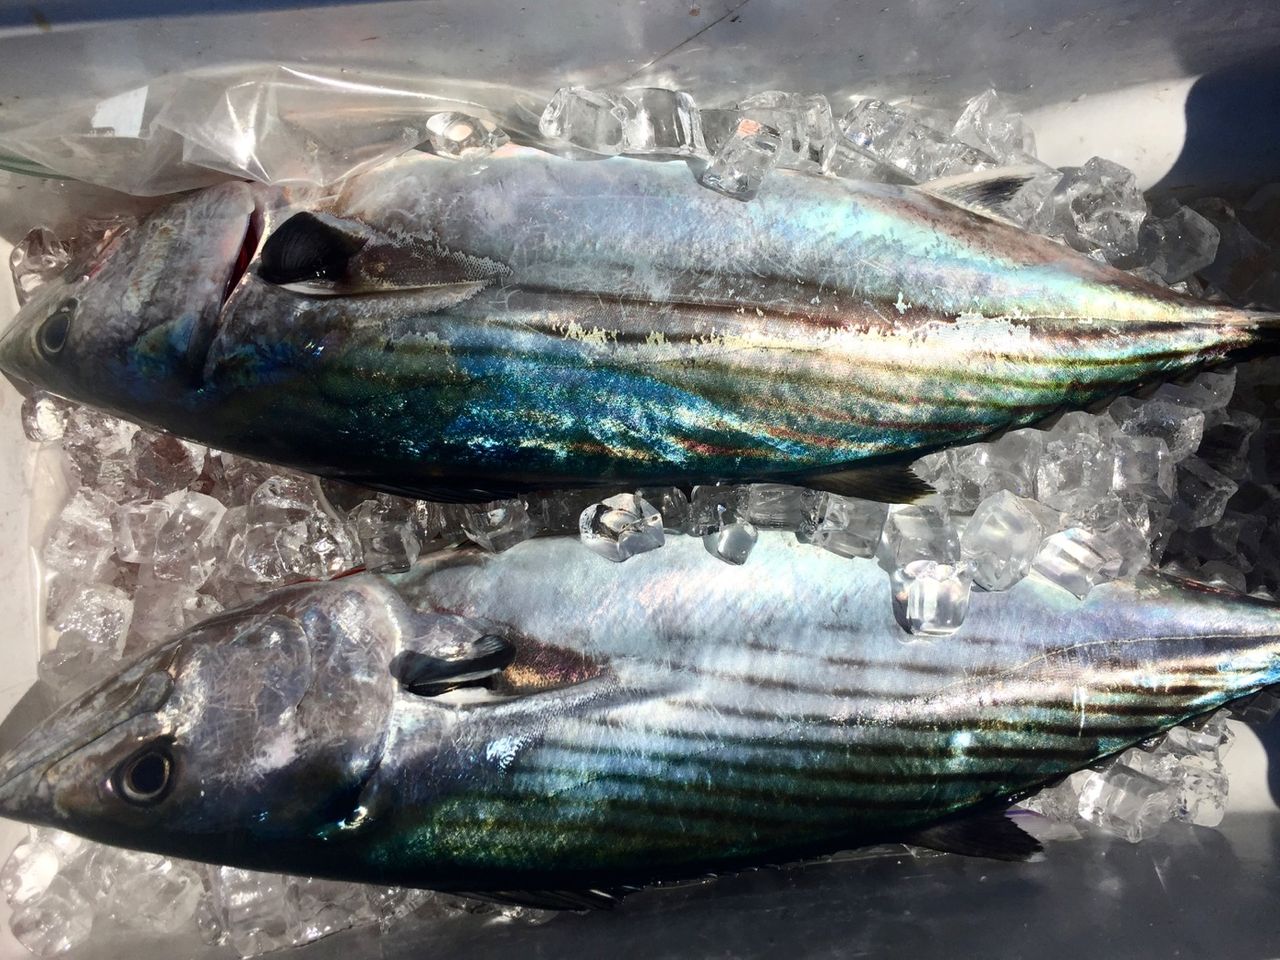 Two Bonito fish in a cooler.